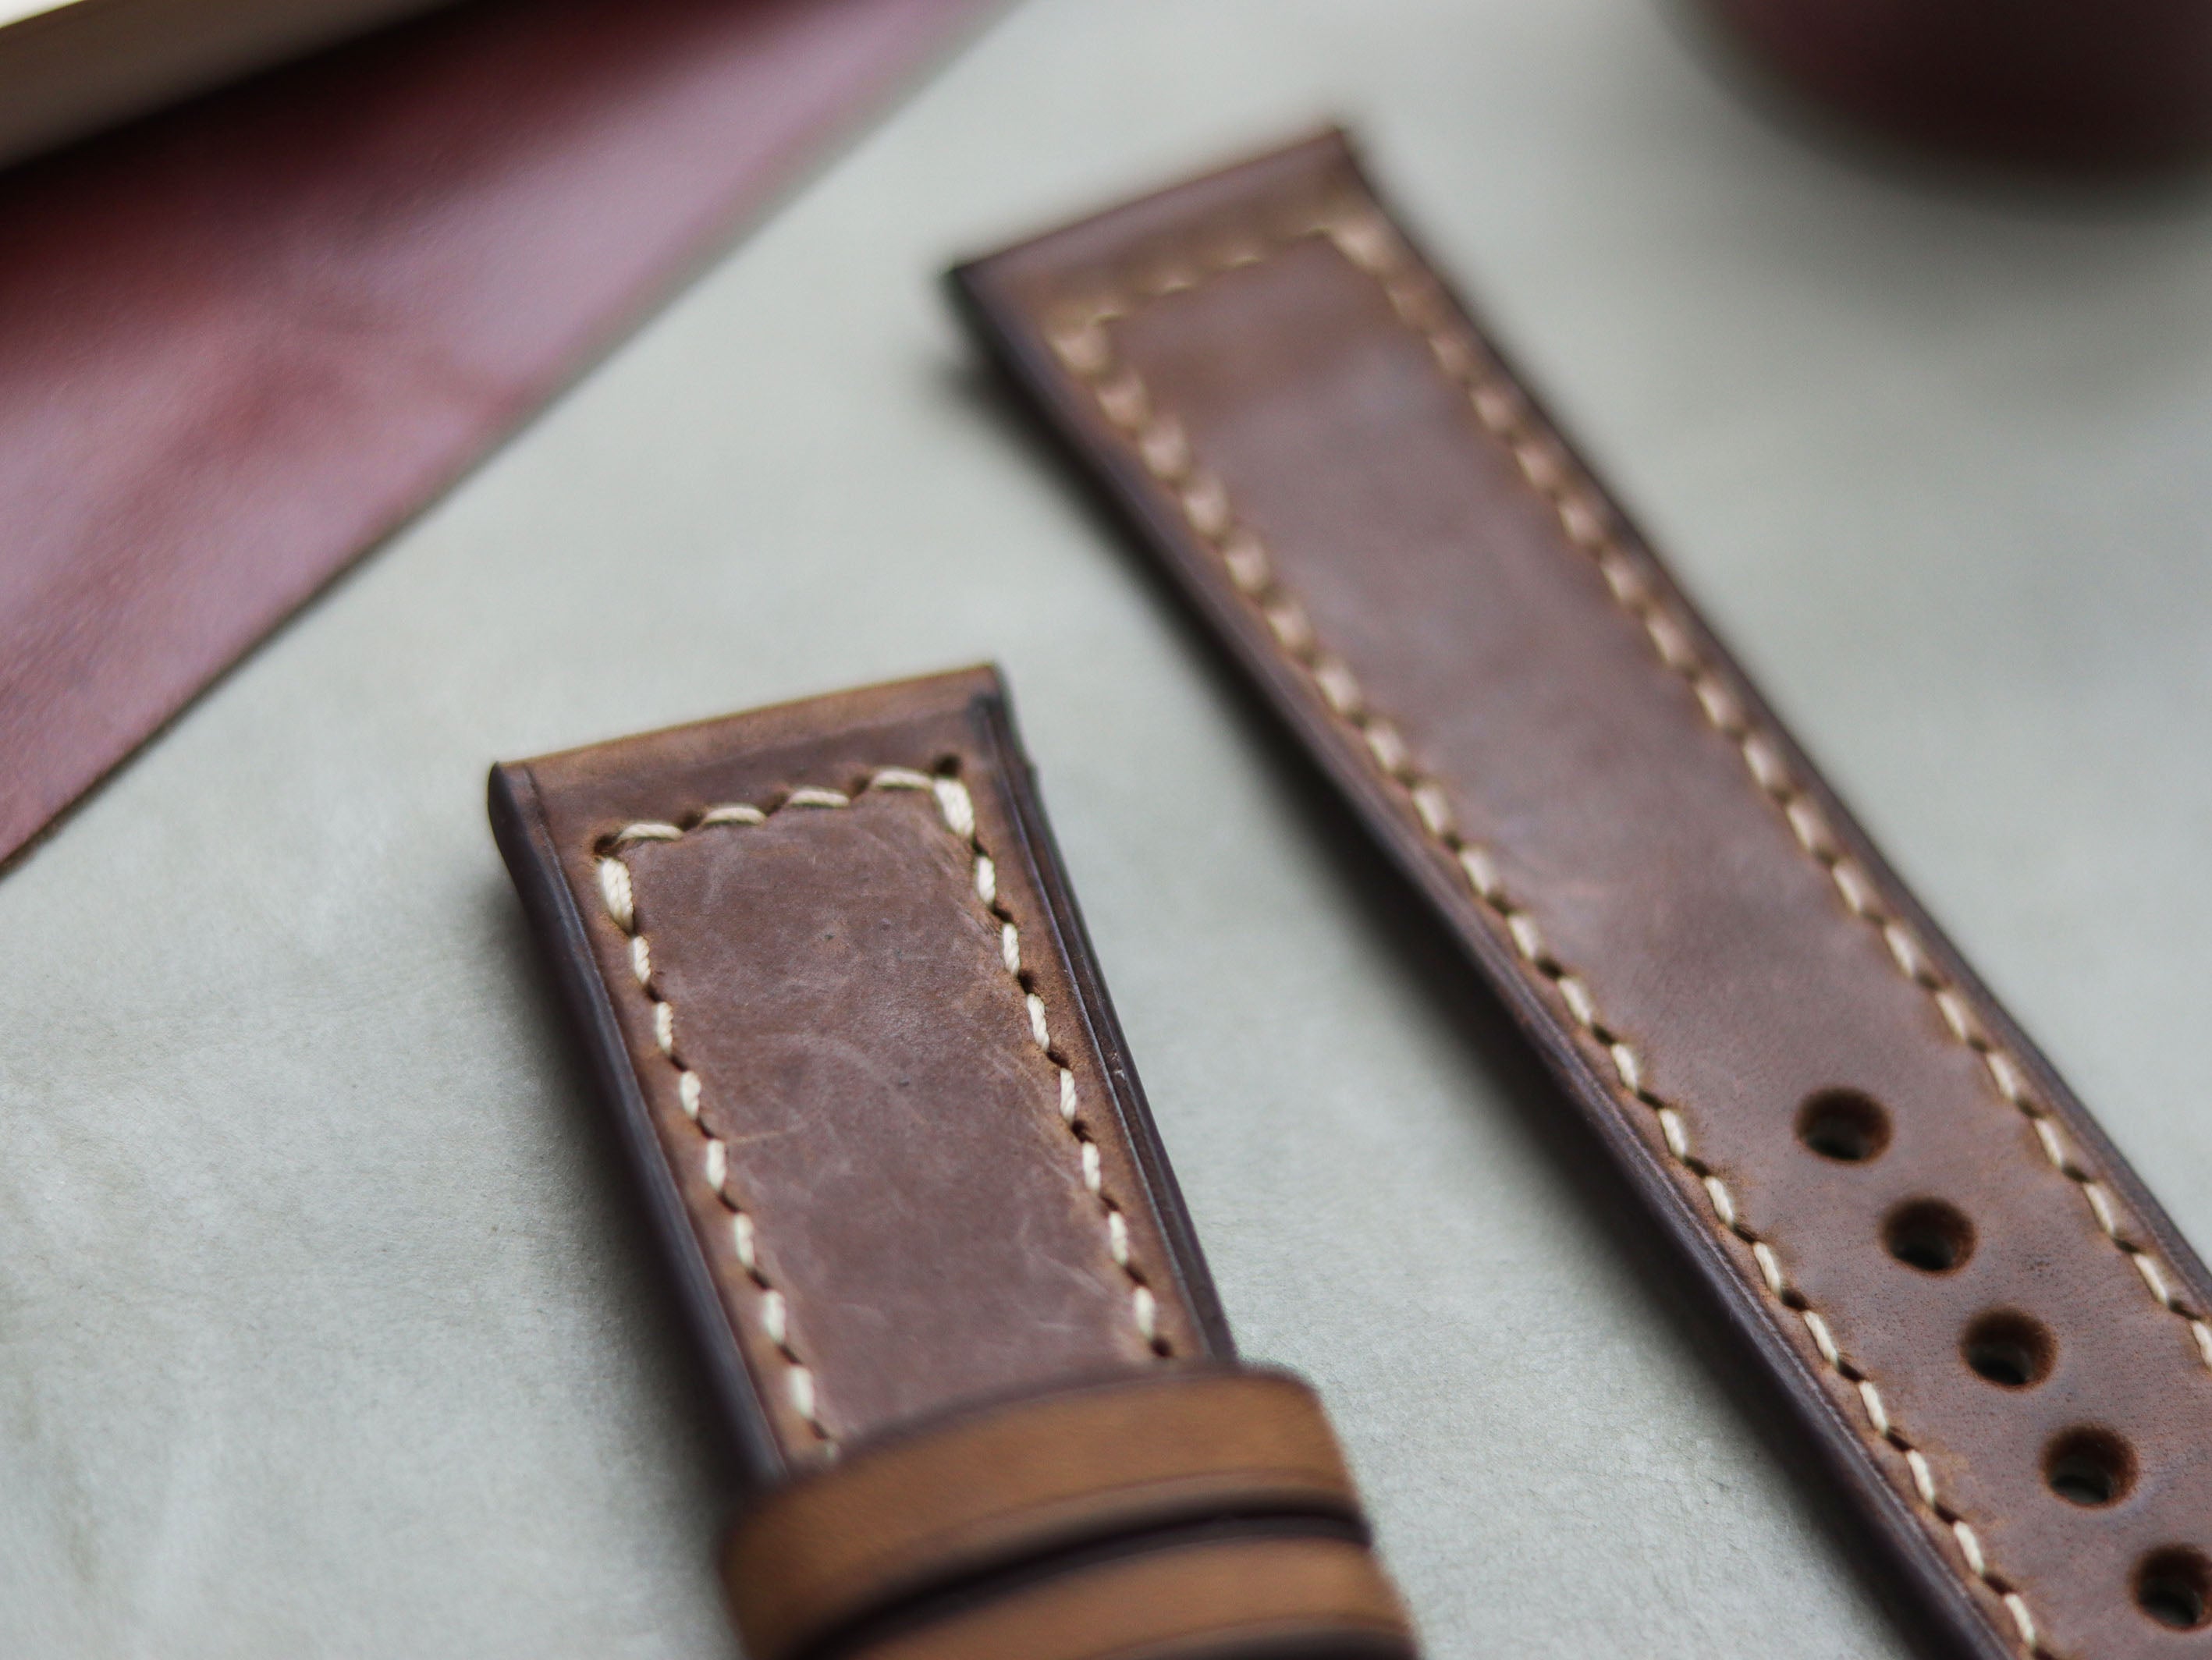 RUSTY BROWN HAND-CRAFTED WATCH STRAPS - BOX STITCHED